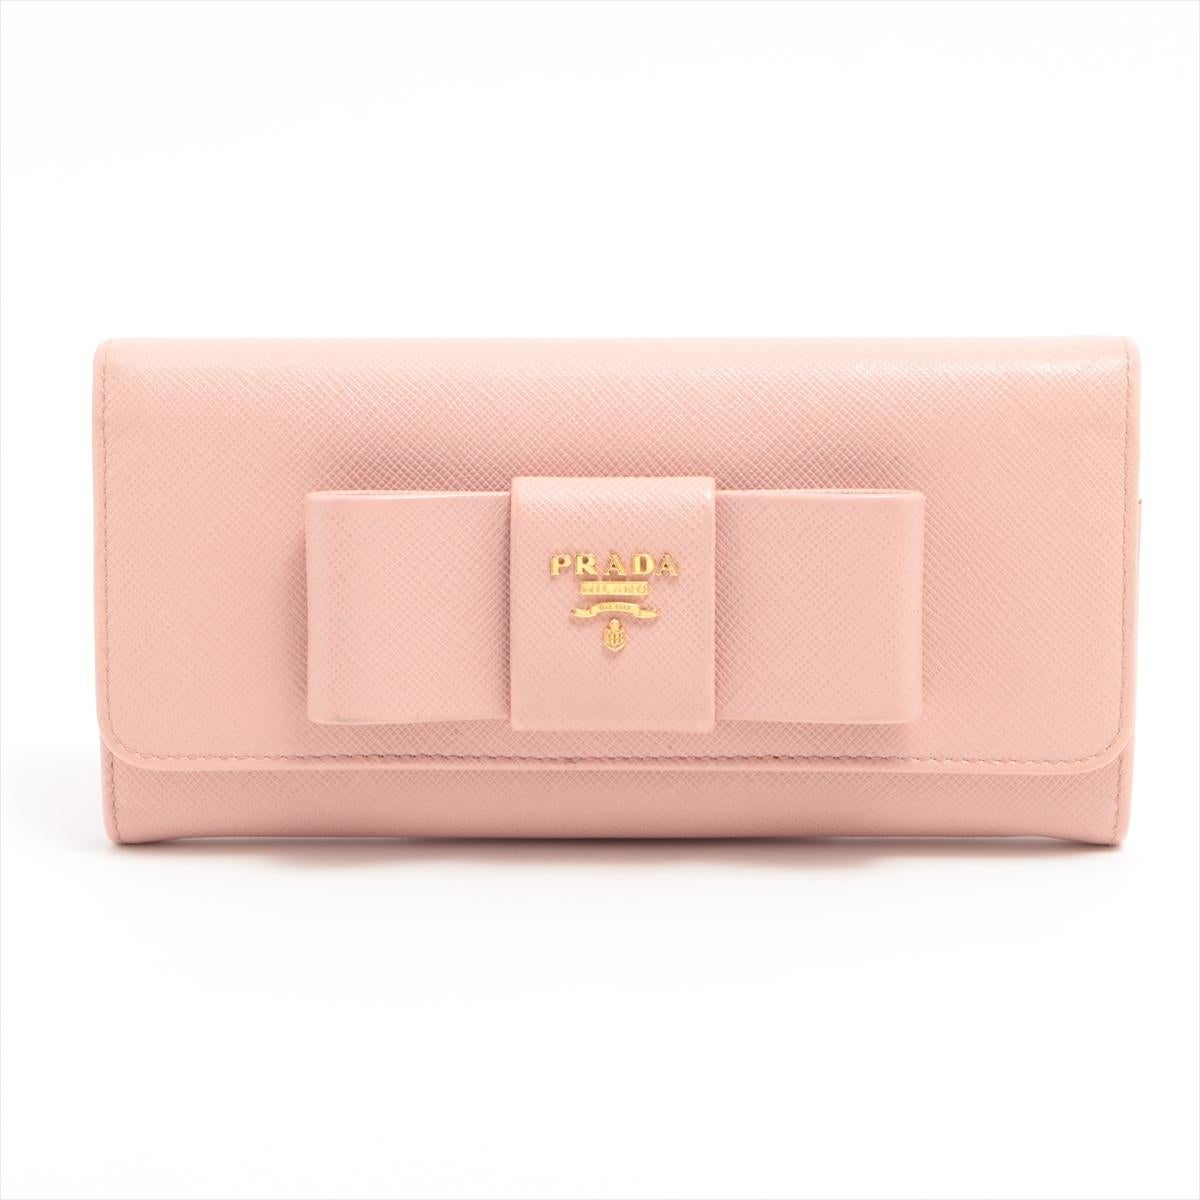 The Prada Ribbon Saffiano Leather Wallet in Pink is a chic and stylish accessory that seamlessly blends luxury with feminine charm. Crafted from Prada's signature Saffiano leather, the wallet features a textured finish that adds a touch of